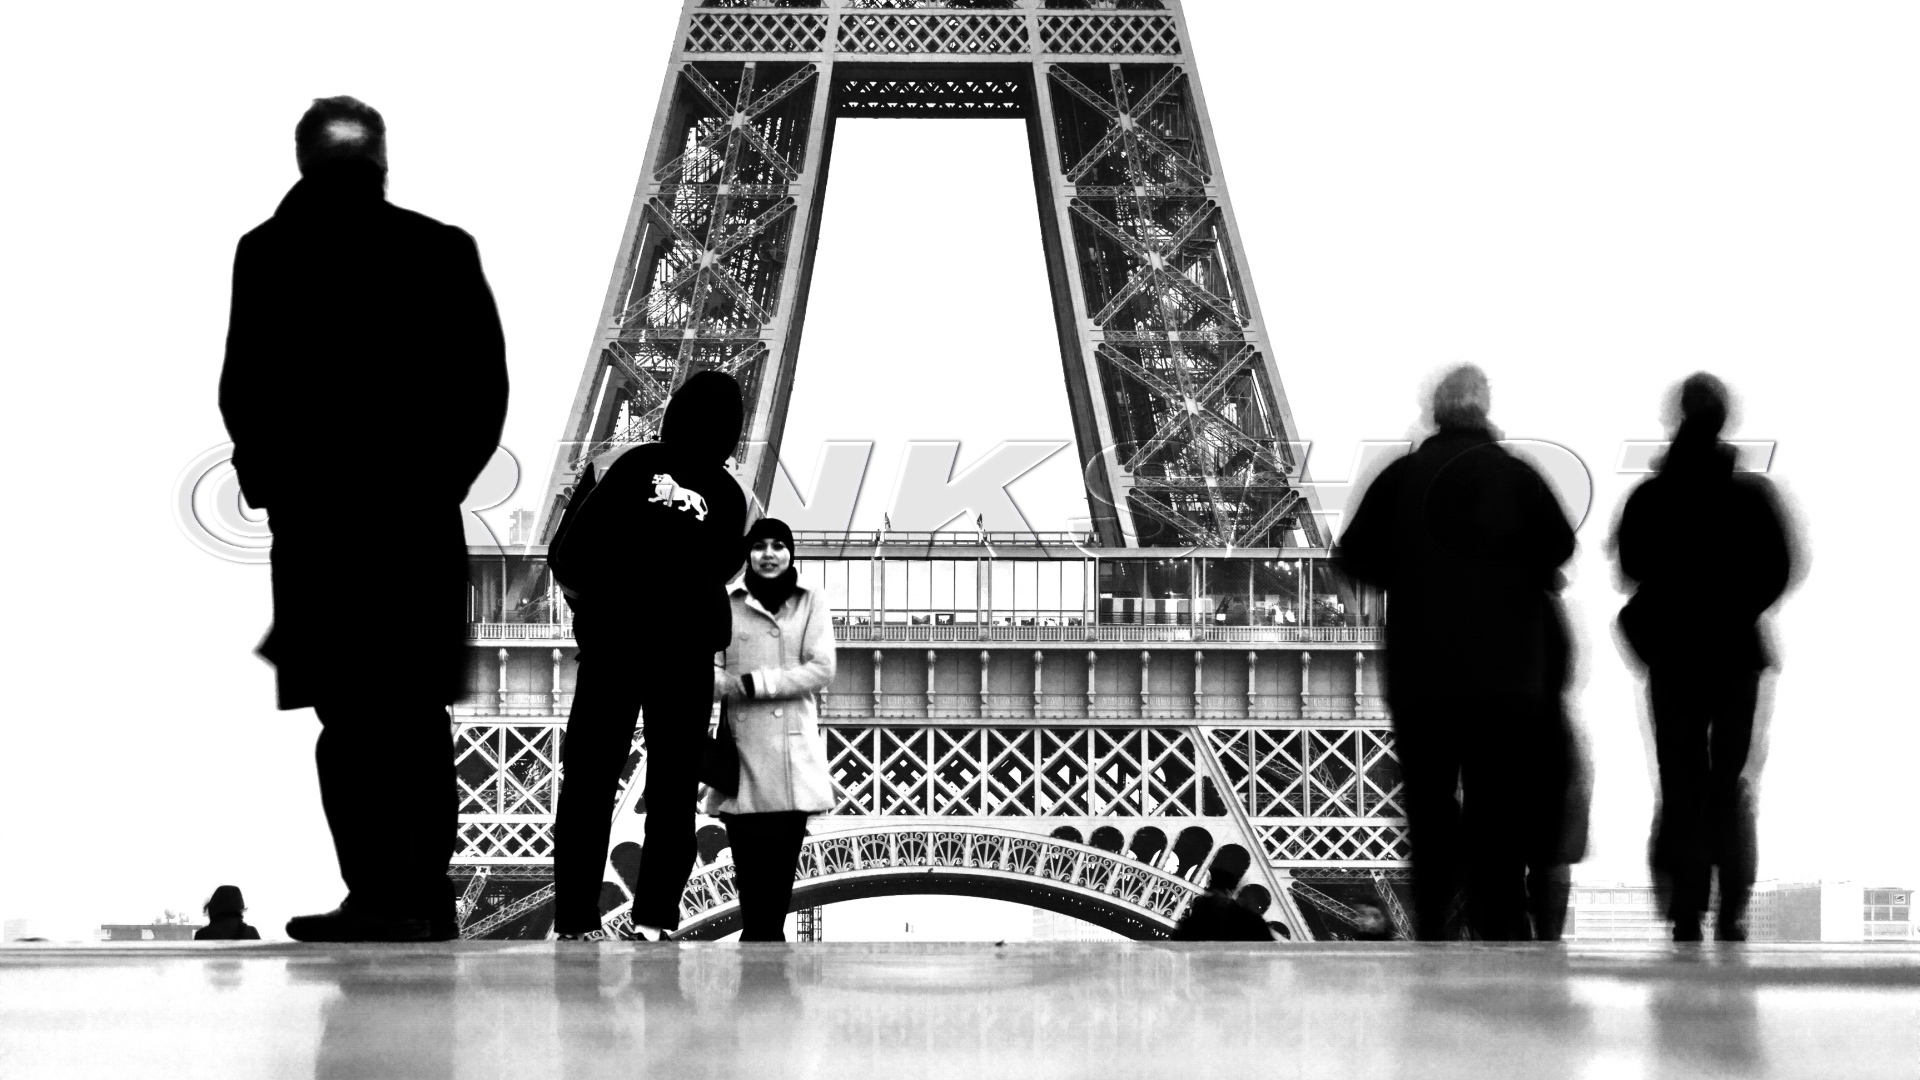 People on the background of the Eiffel Tower, black and white photo